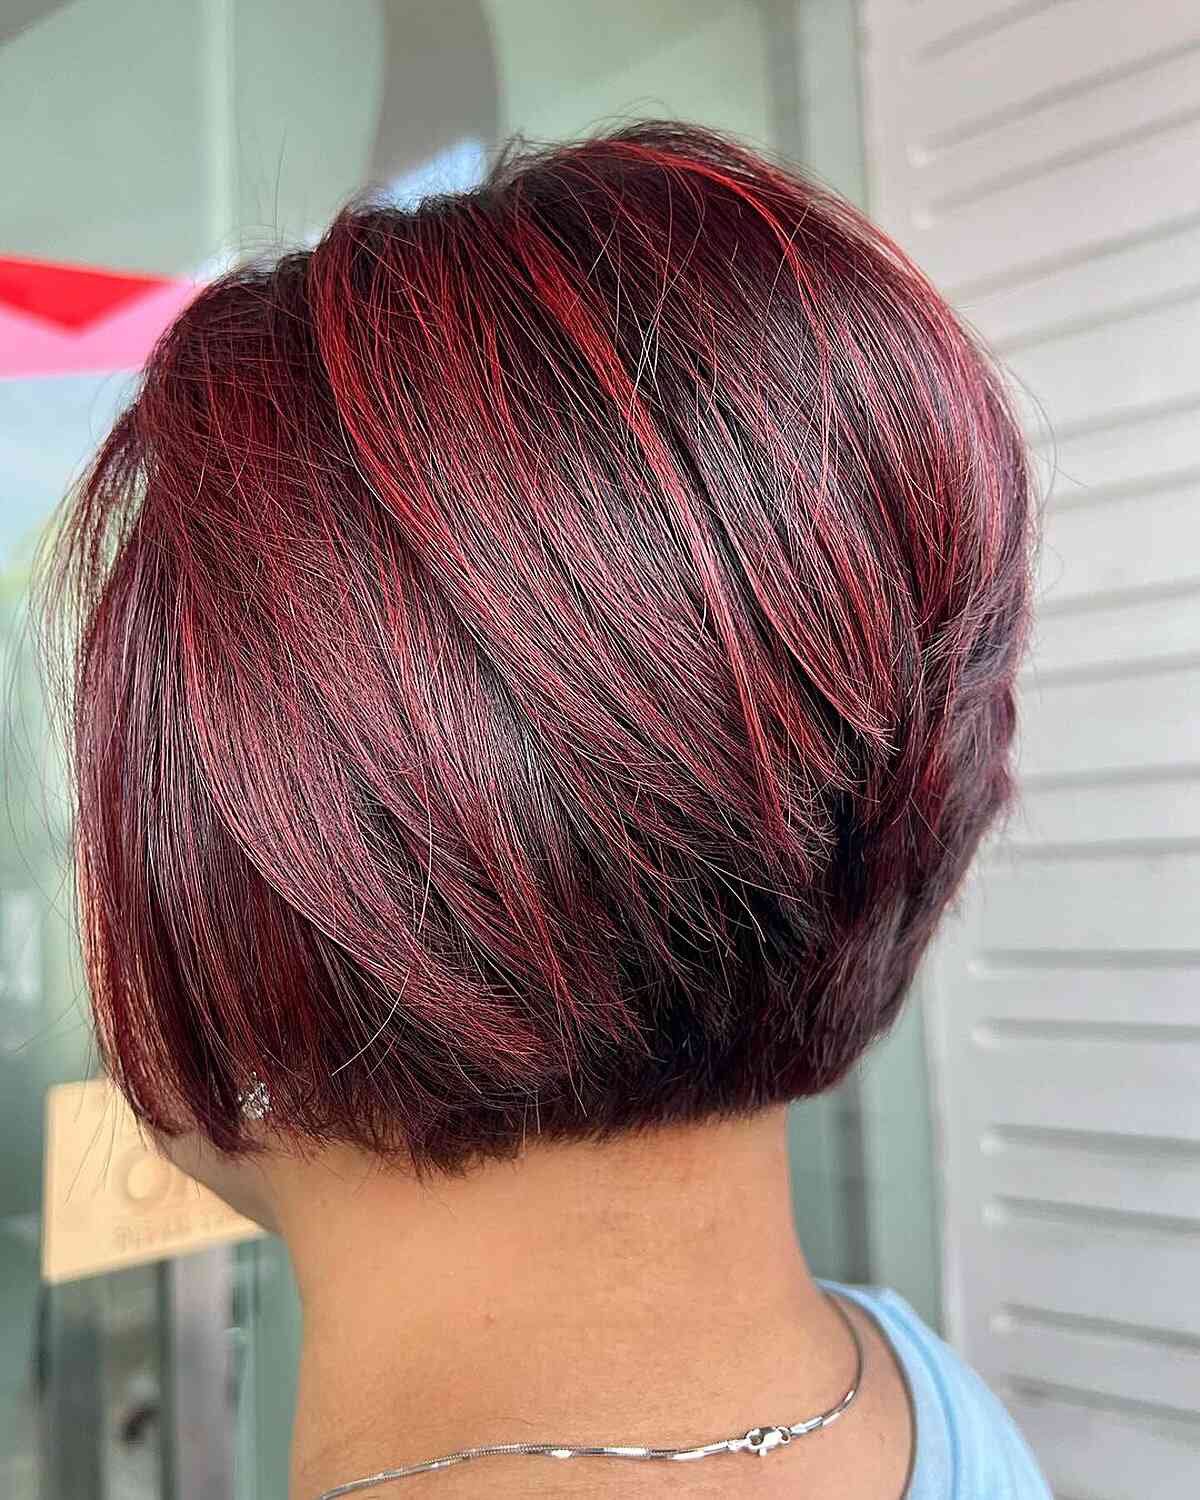 Dimensional Red Chic Stacked Wedge Bob on Short Hair